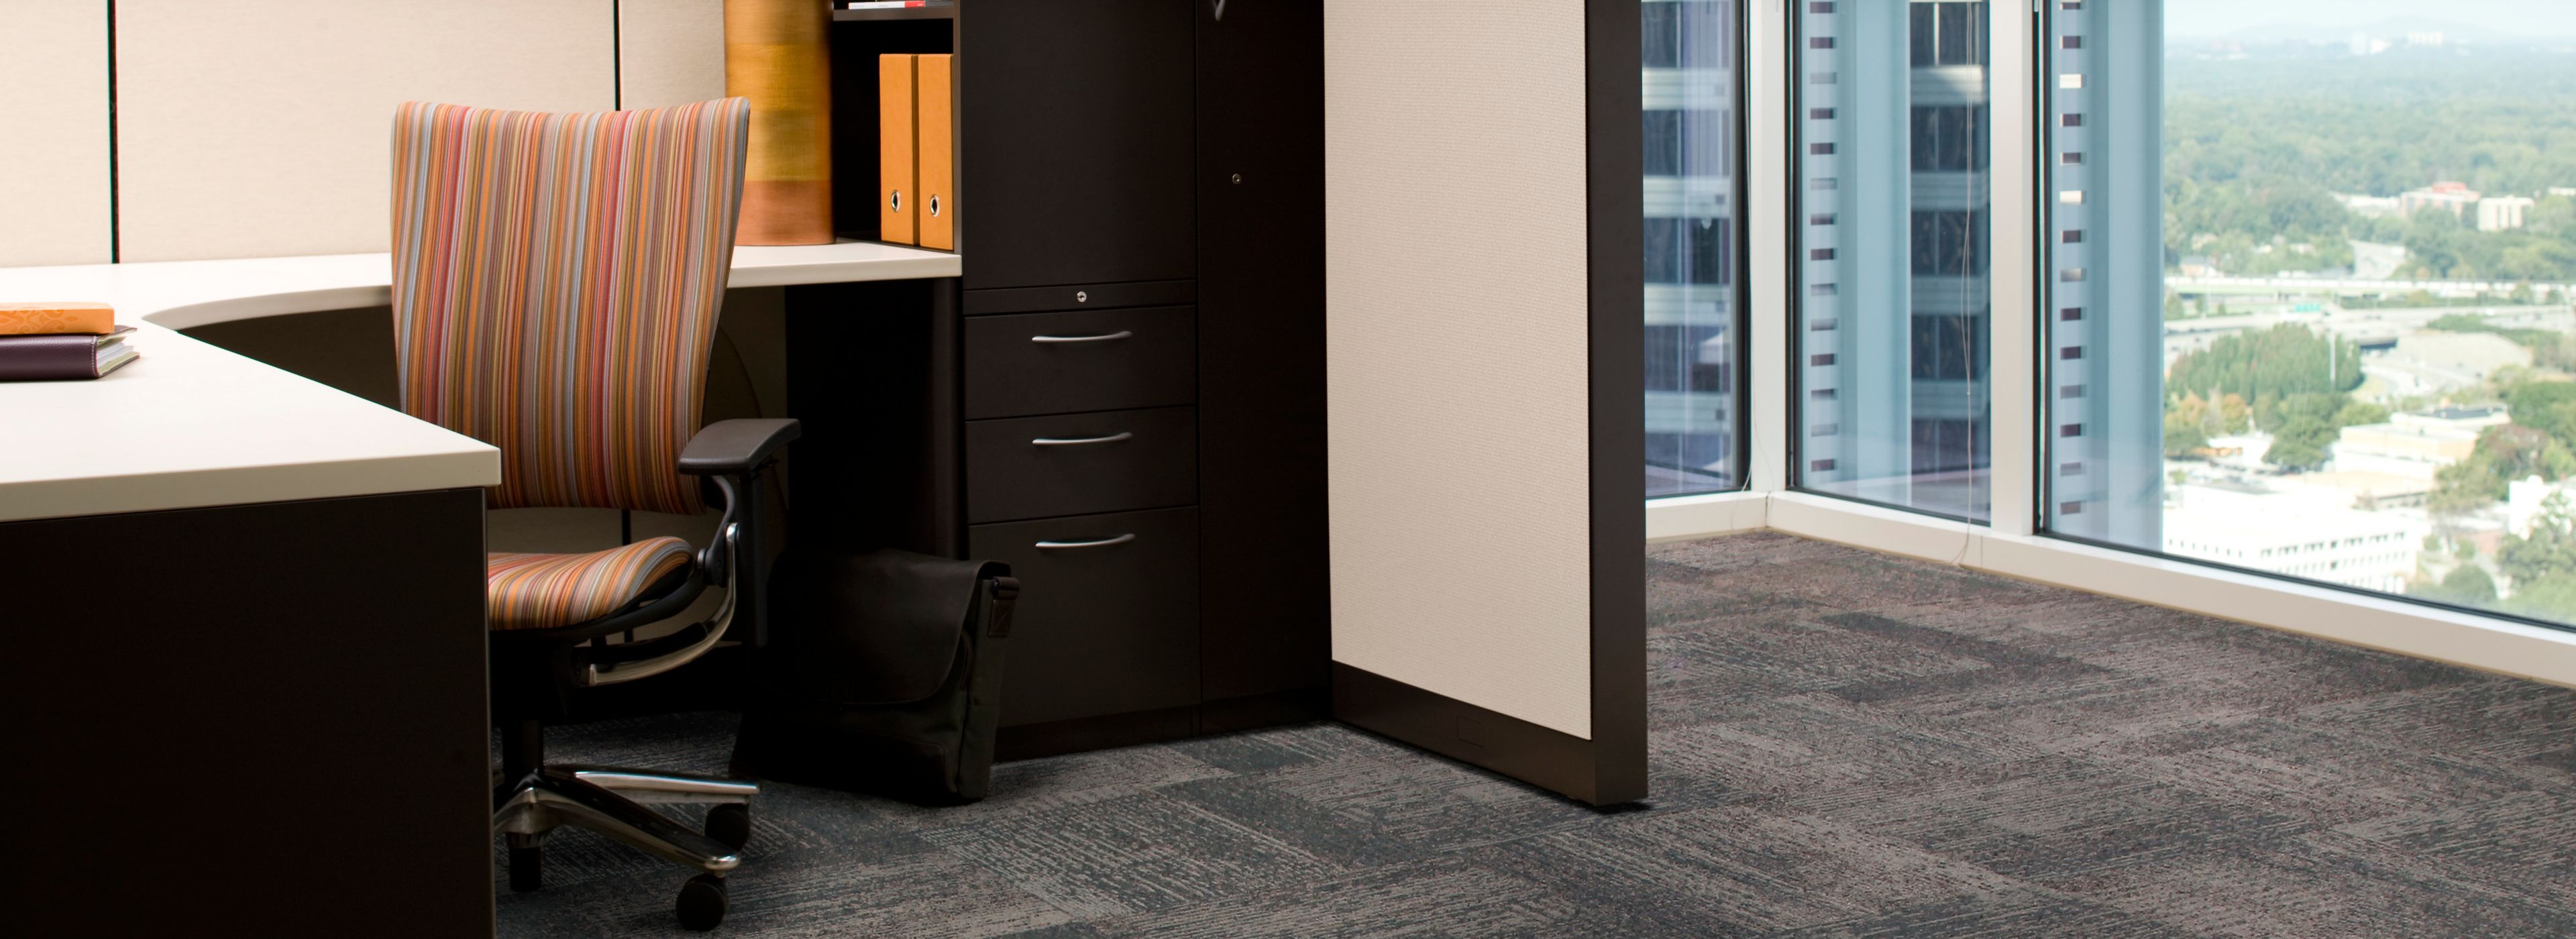 Interface Plain Weave carpet tile in private office image number 1